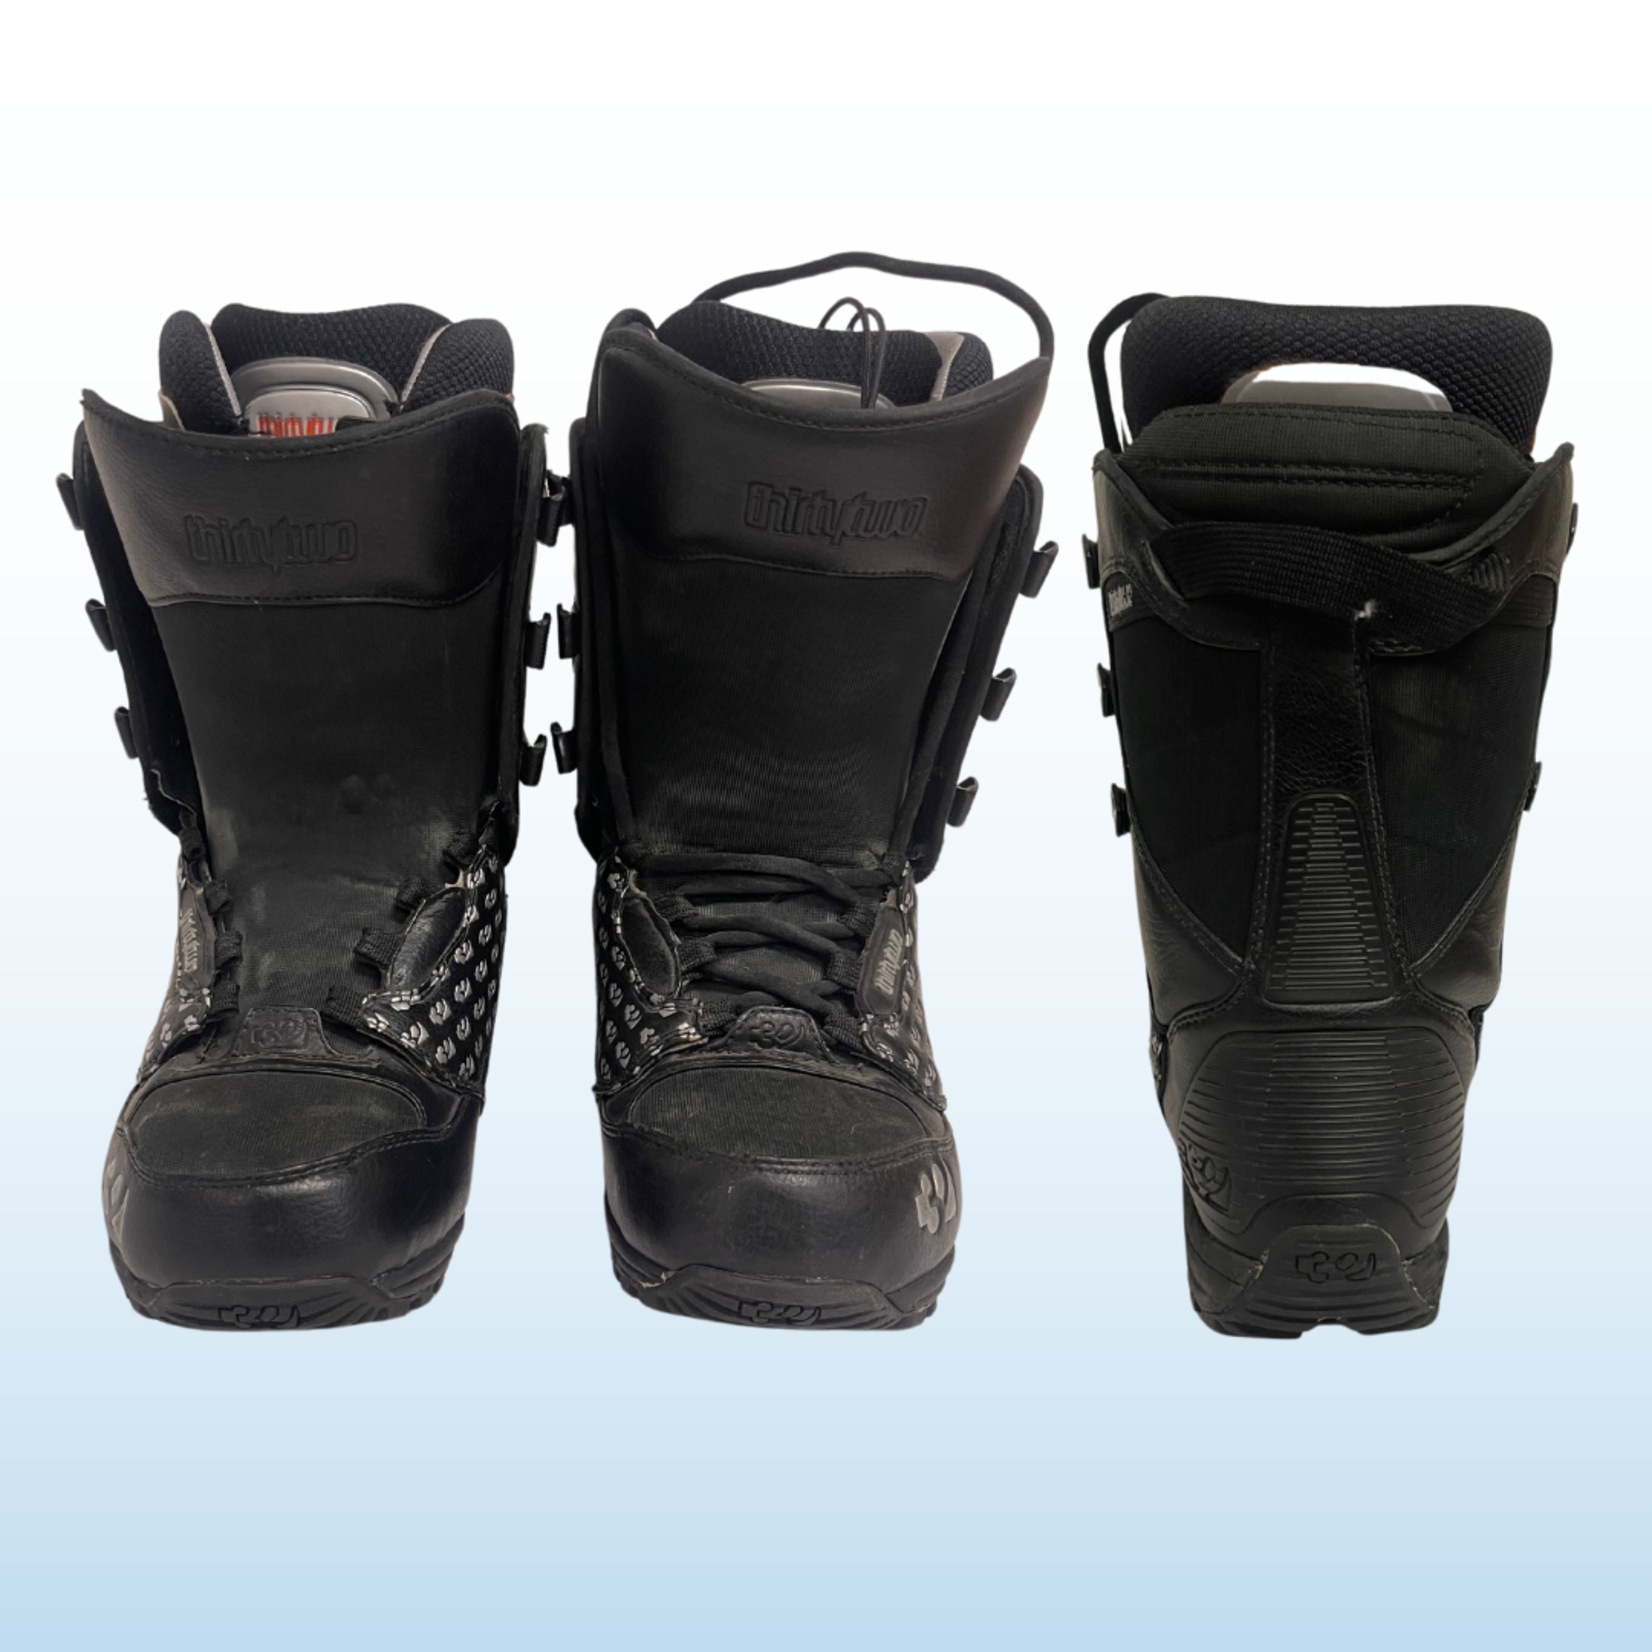 ThirtyTwo ThirtyTwo Lashed Snowboard Boots, Size 7 WMNS